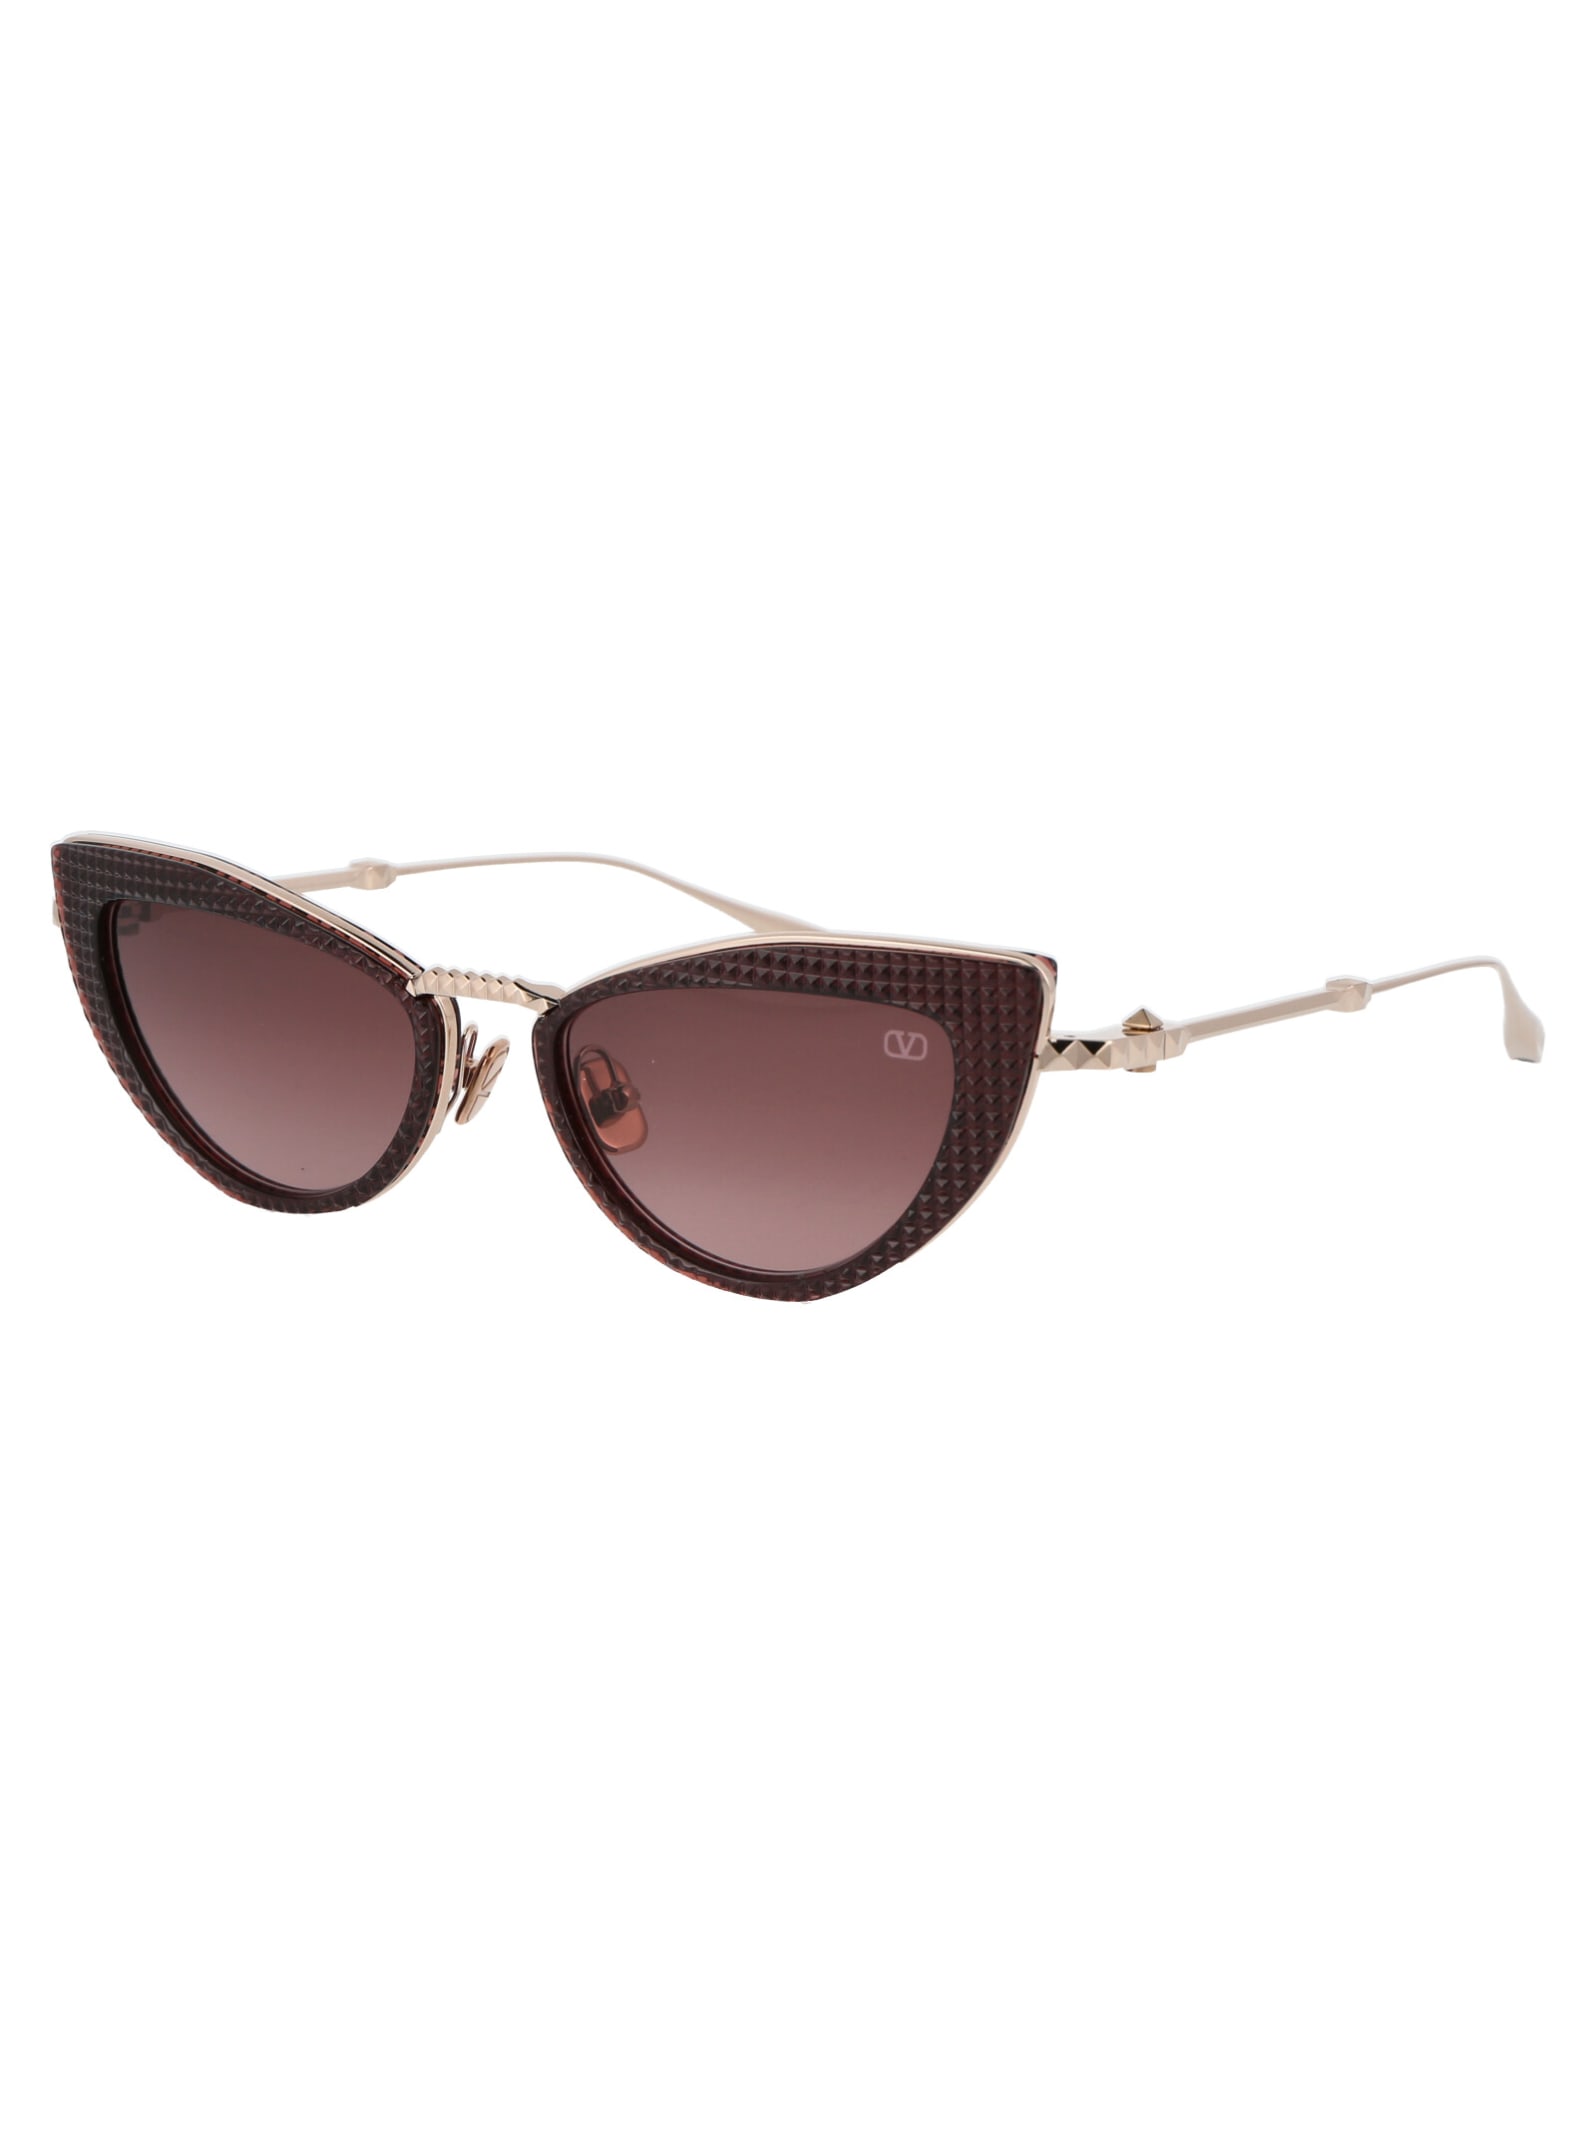 Shop Valentino Viii Sunglasses In White Gold Crystal Bordeaux W/ Dark Rose To Light Rose Gradient